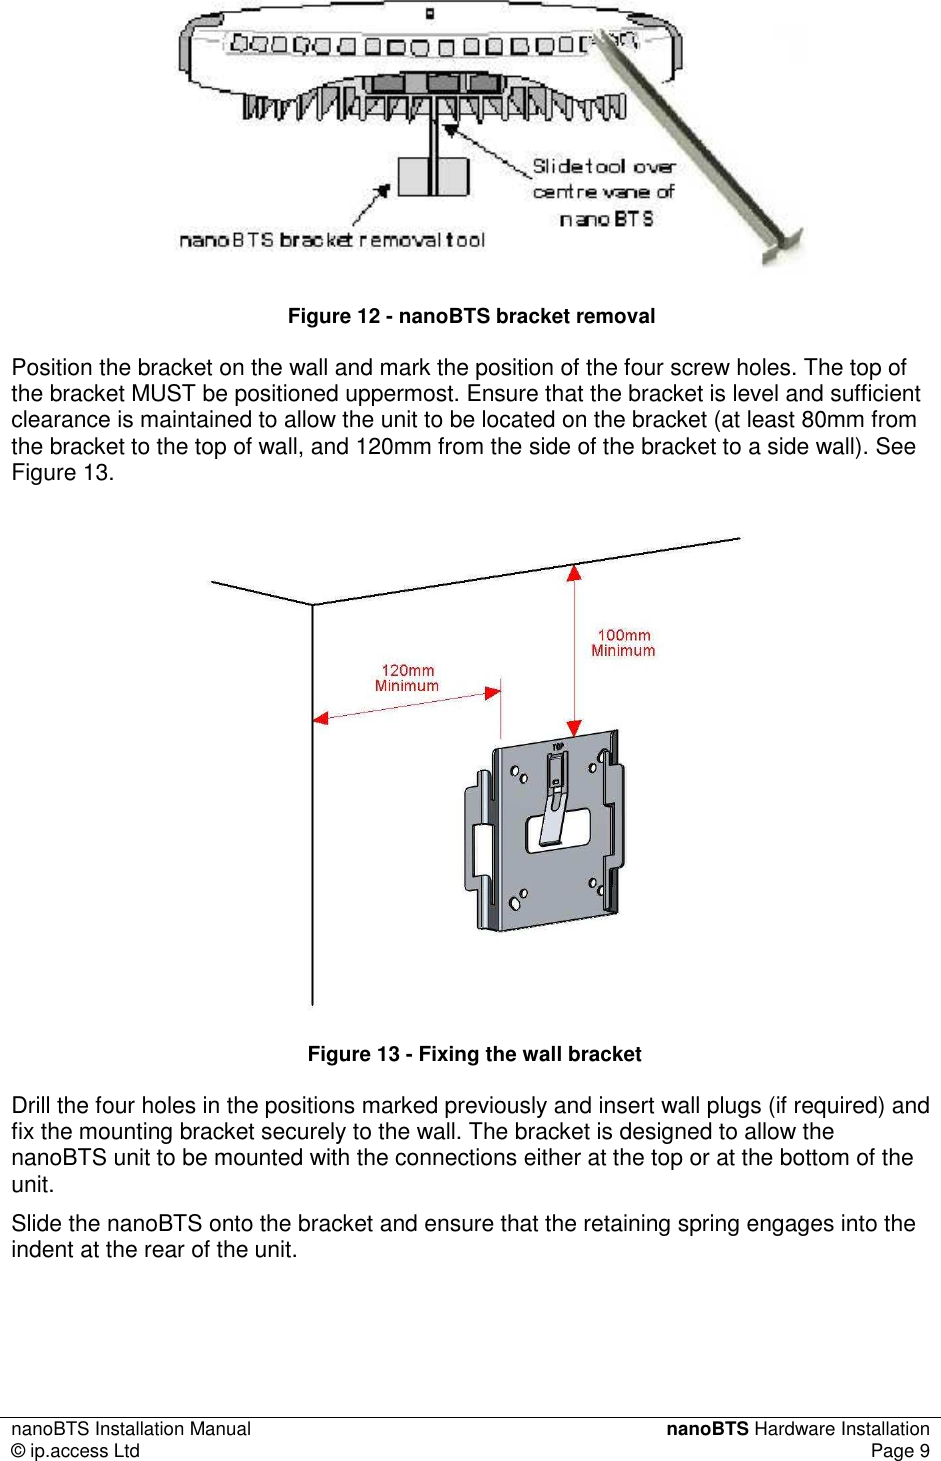 nanoBTS Installation Manual  nanoBTS Hardware Installation © ip.access Ltd  Page 9   Figure 12 - nanoBTS bracket removal Position the bracket on the wall and mark the position of the four screw holes. The top of the bracket MUST be positioned uppermost. Ensure that the bracket is level and sufficient clearance is maintained to allow the unit to be located on the bracket (at least 80mm from the bracket to the top of wall, and 120mm from the side of the bracket to a side wall). See Figure 13.   Figure 13 - Fixing the wall bracket Drill the four holes in the positions marked previously and insert wall plugs (if required) and fix the mounting bracket securely to the wall. The bracket is designed to allow the nanoBTS unit to be mounted with the connections either at the top or at the bottom of the unit. Slide the nanoBTS onto the bracket and ensure that the retaining spring engages into the indent at the rear of the unit. 